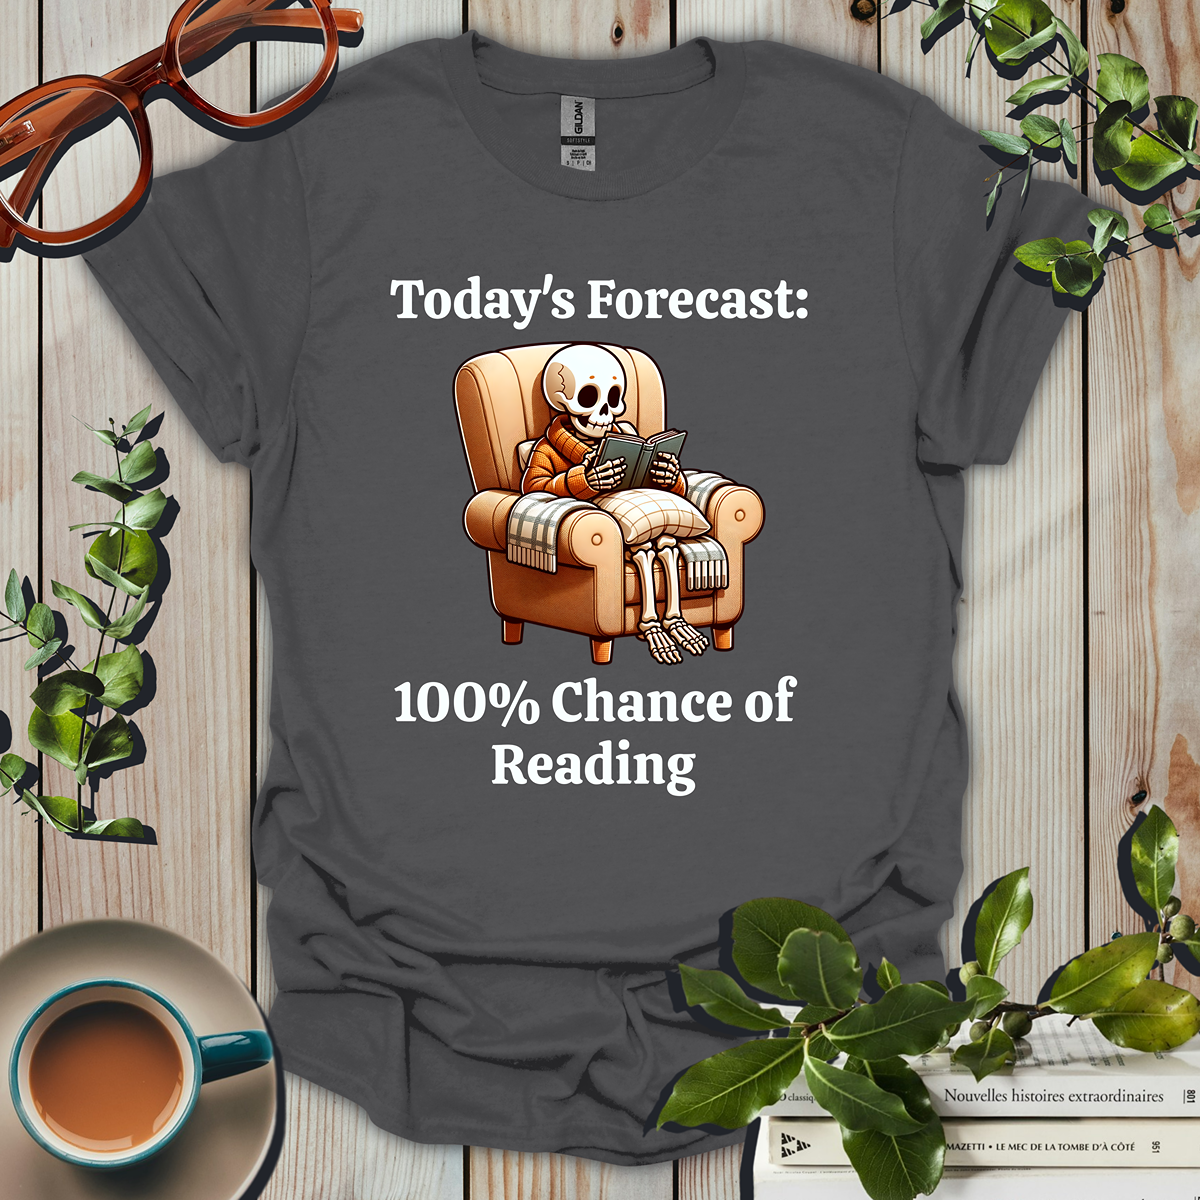 100% Chance Of Reading T-Shirt